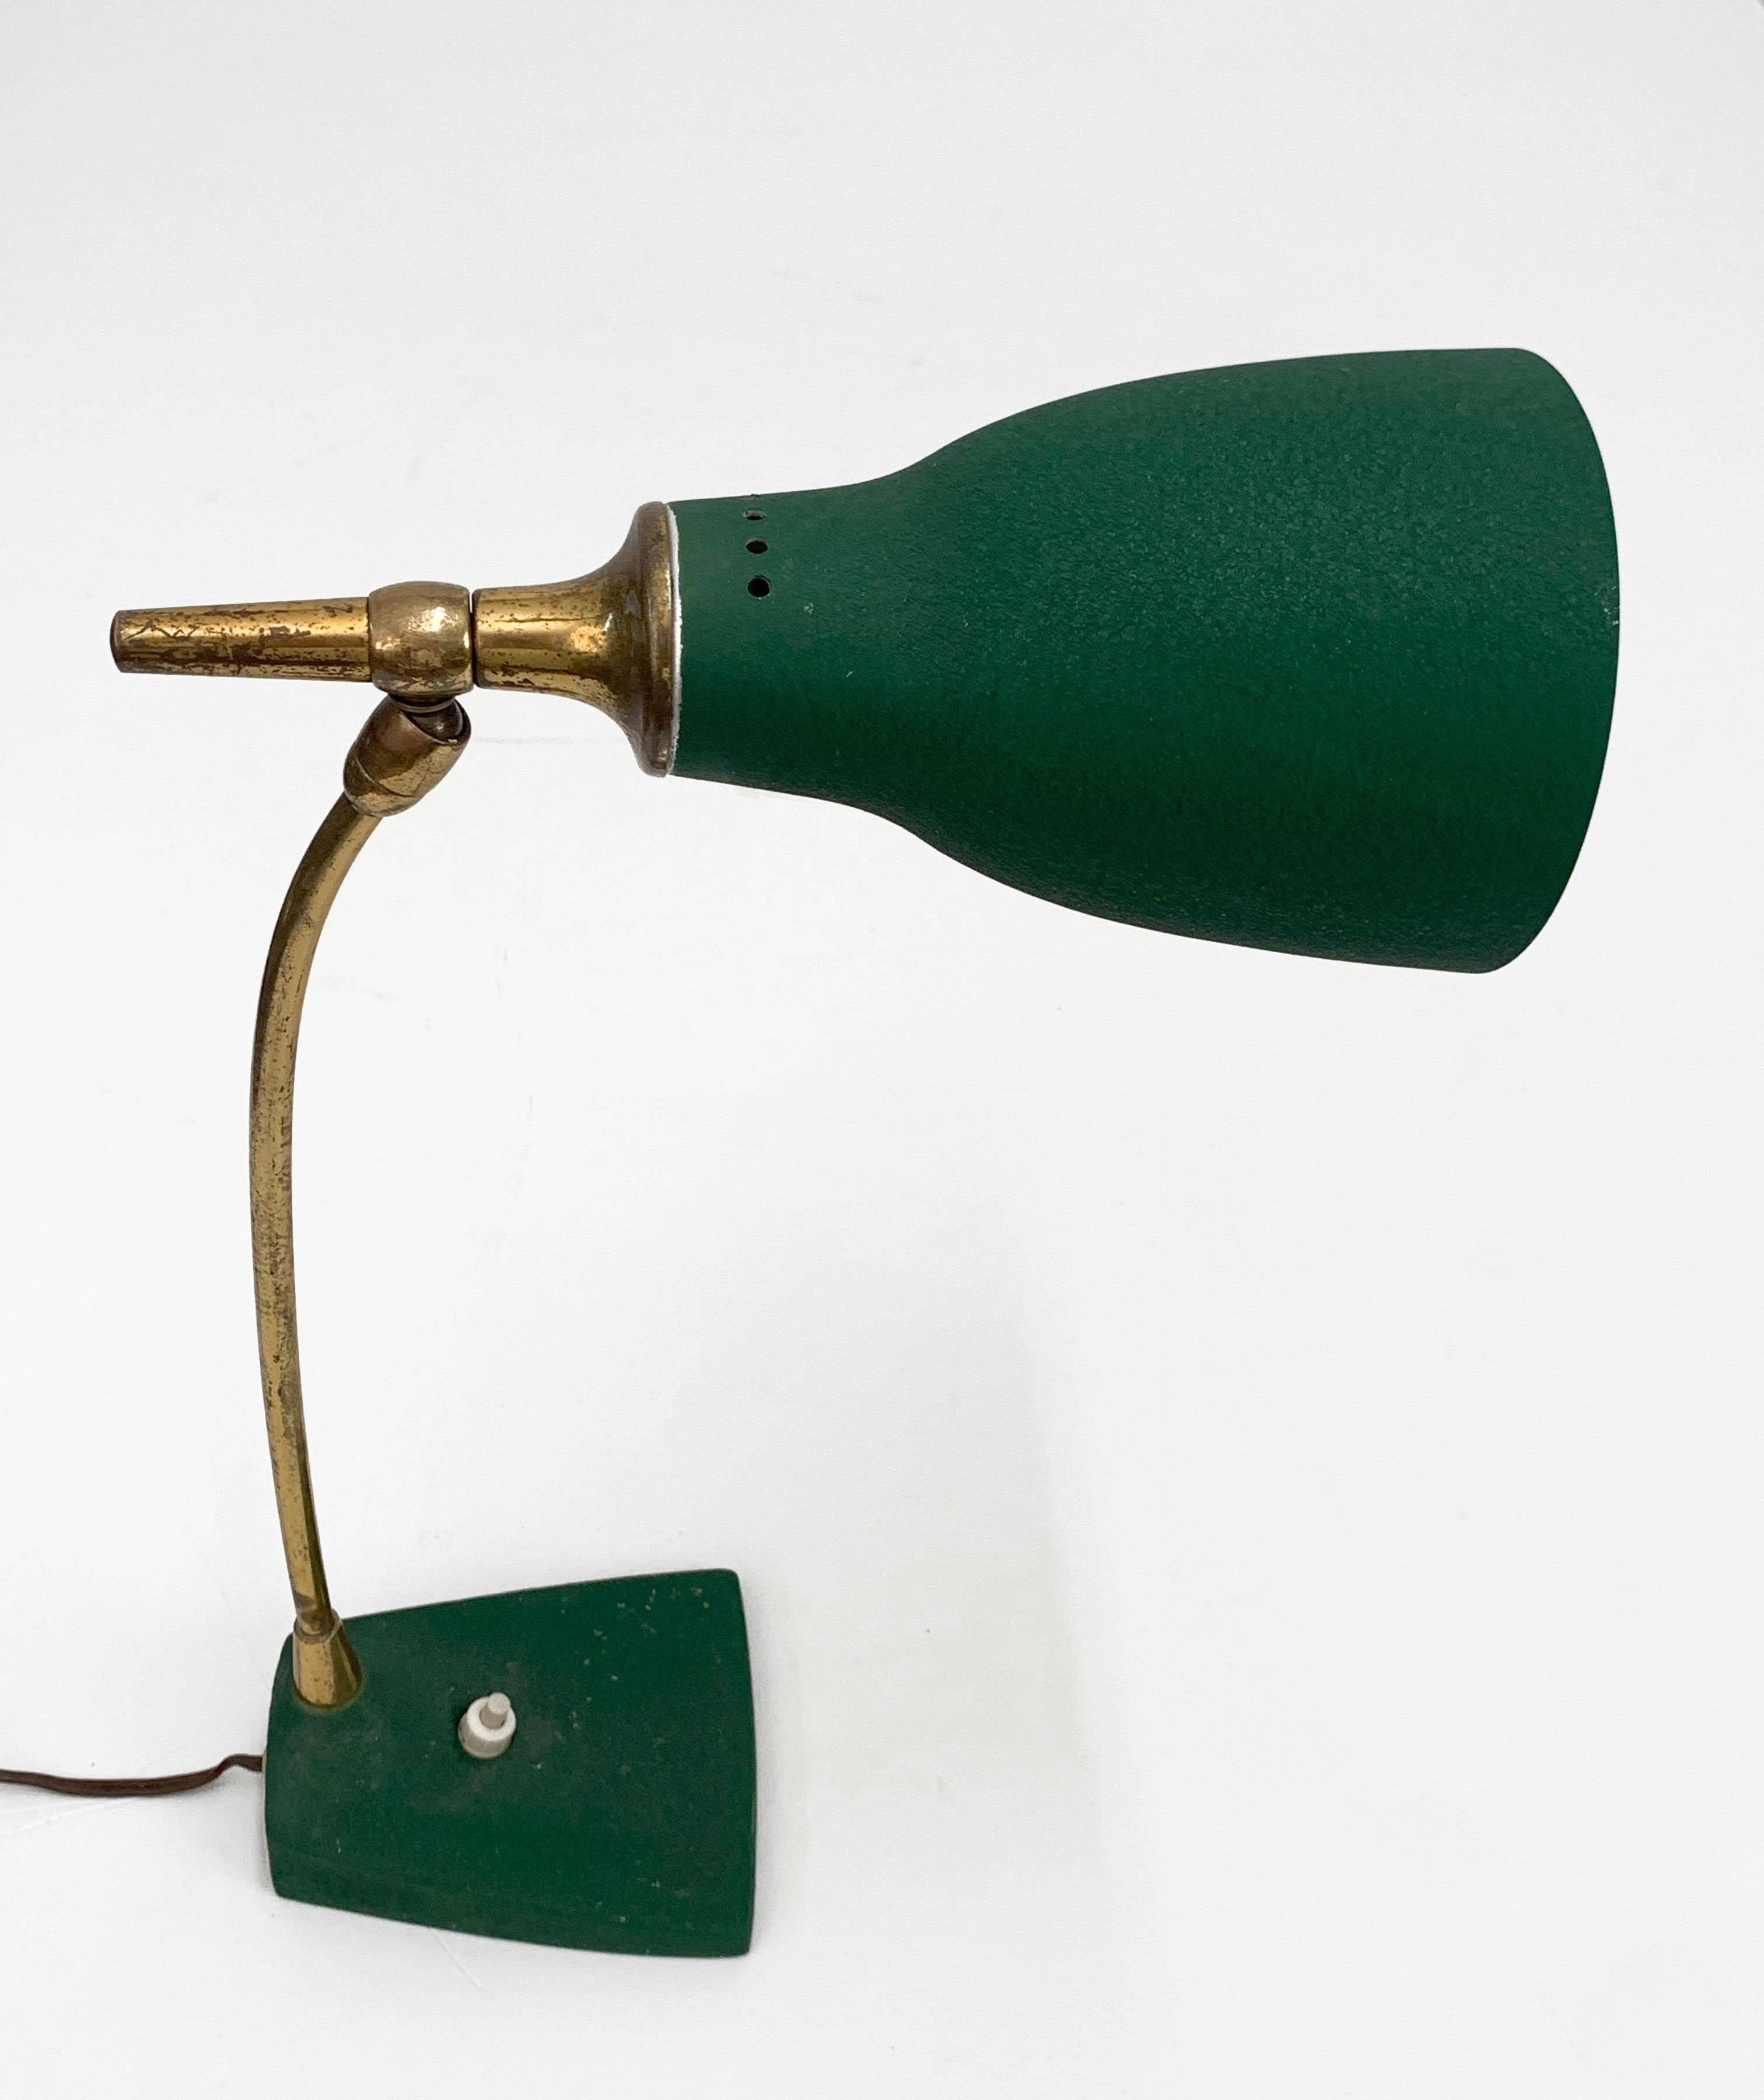 Midcentury Gebrüder Cosack Adjustable Green Brass and Cast Iron Table Lamp 1950s For Sale 2